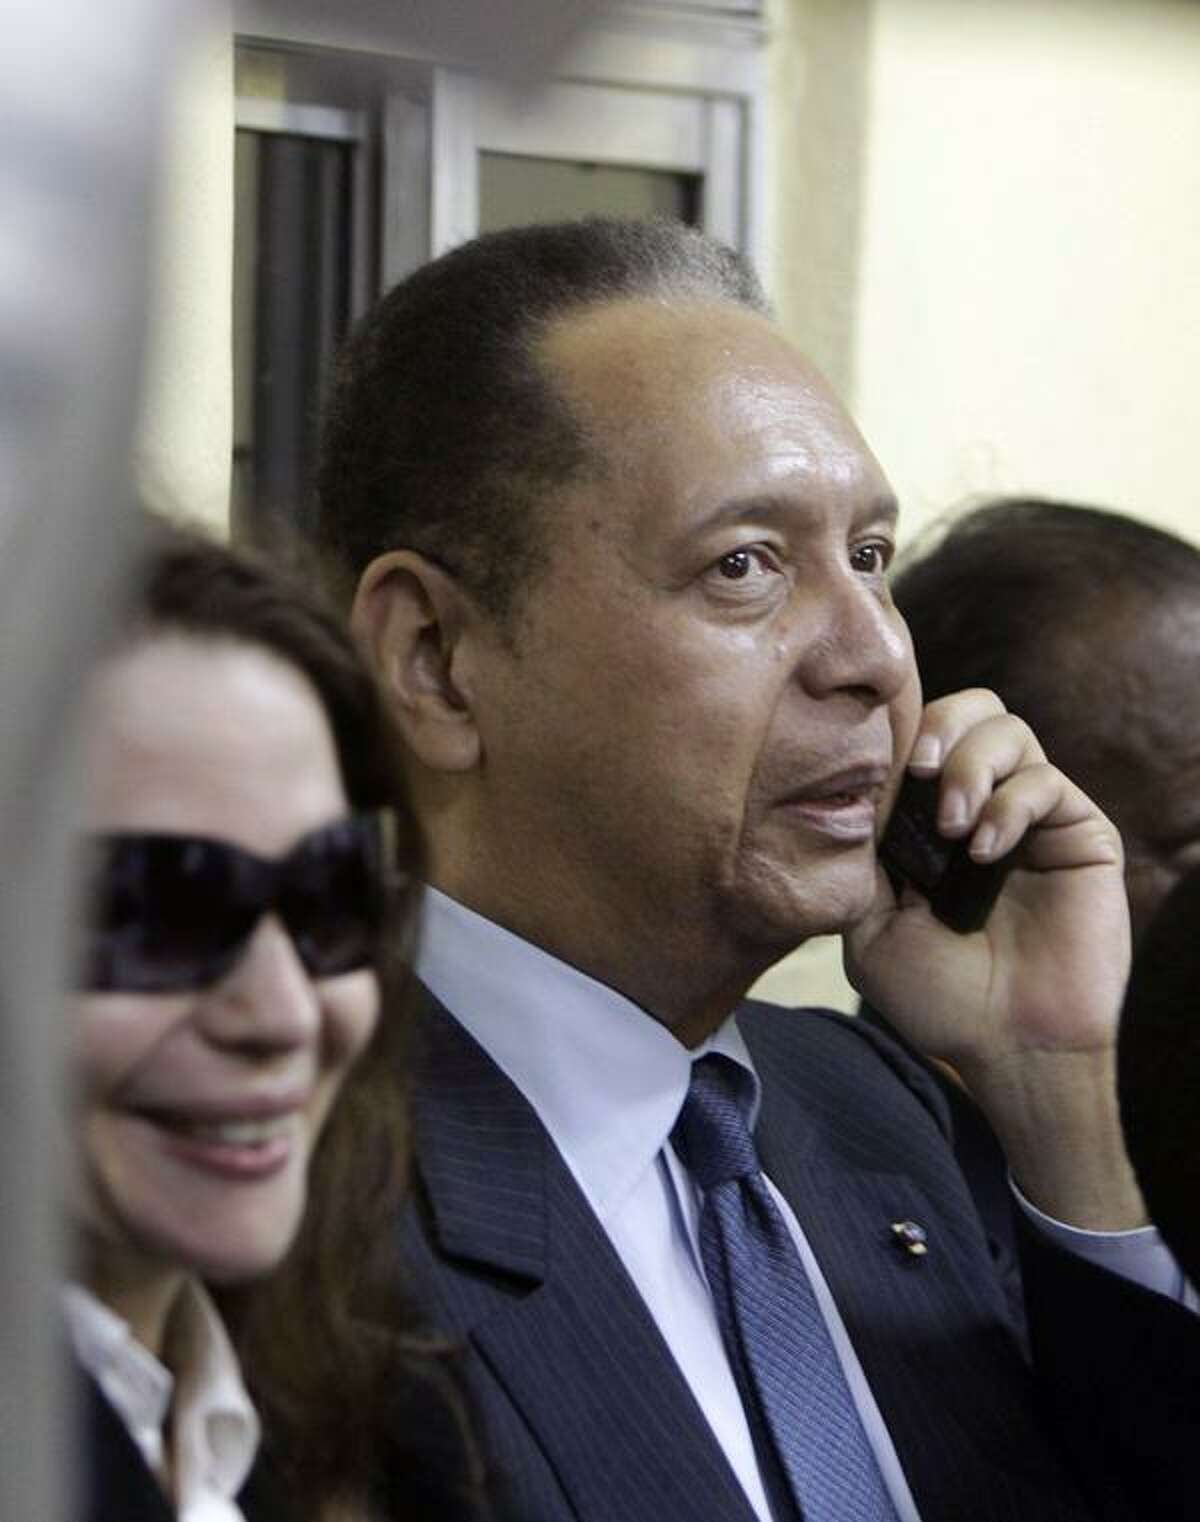 Former Haitian dictator Jean-Claude "Baby Doc" Duvalier talks by phone next to his wife Veronique Roy upon his arrival to the Toussaint Louverture international airport in Port-au-Prince, Haiti, Sunday Jan. 16, 2011. Duvalier returned Sunday to Haiti after nearly 25 years in exile, a surprising and perplexing move that comes as his country struggles with a political crisis and the stalled effort to recover from last year's devastating earthquake. (AP Photo/Dieu Nalio Chery)